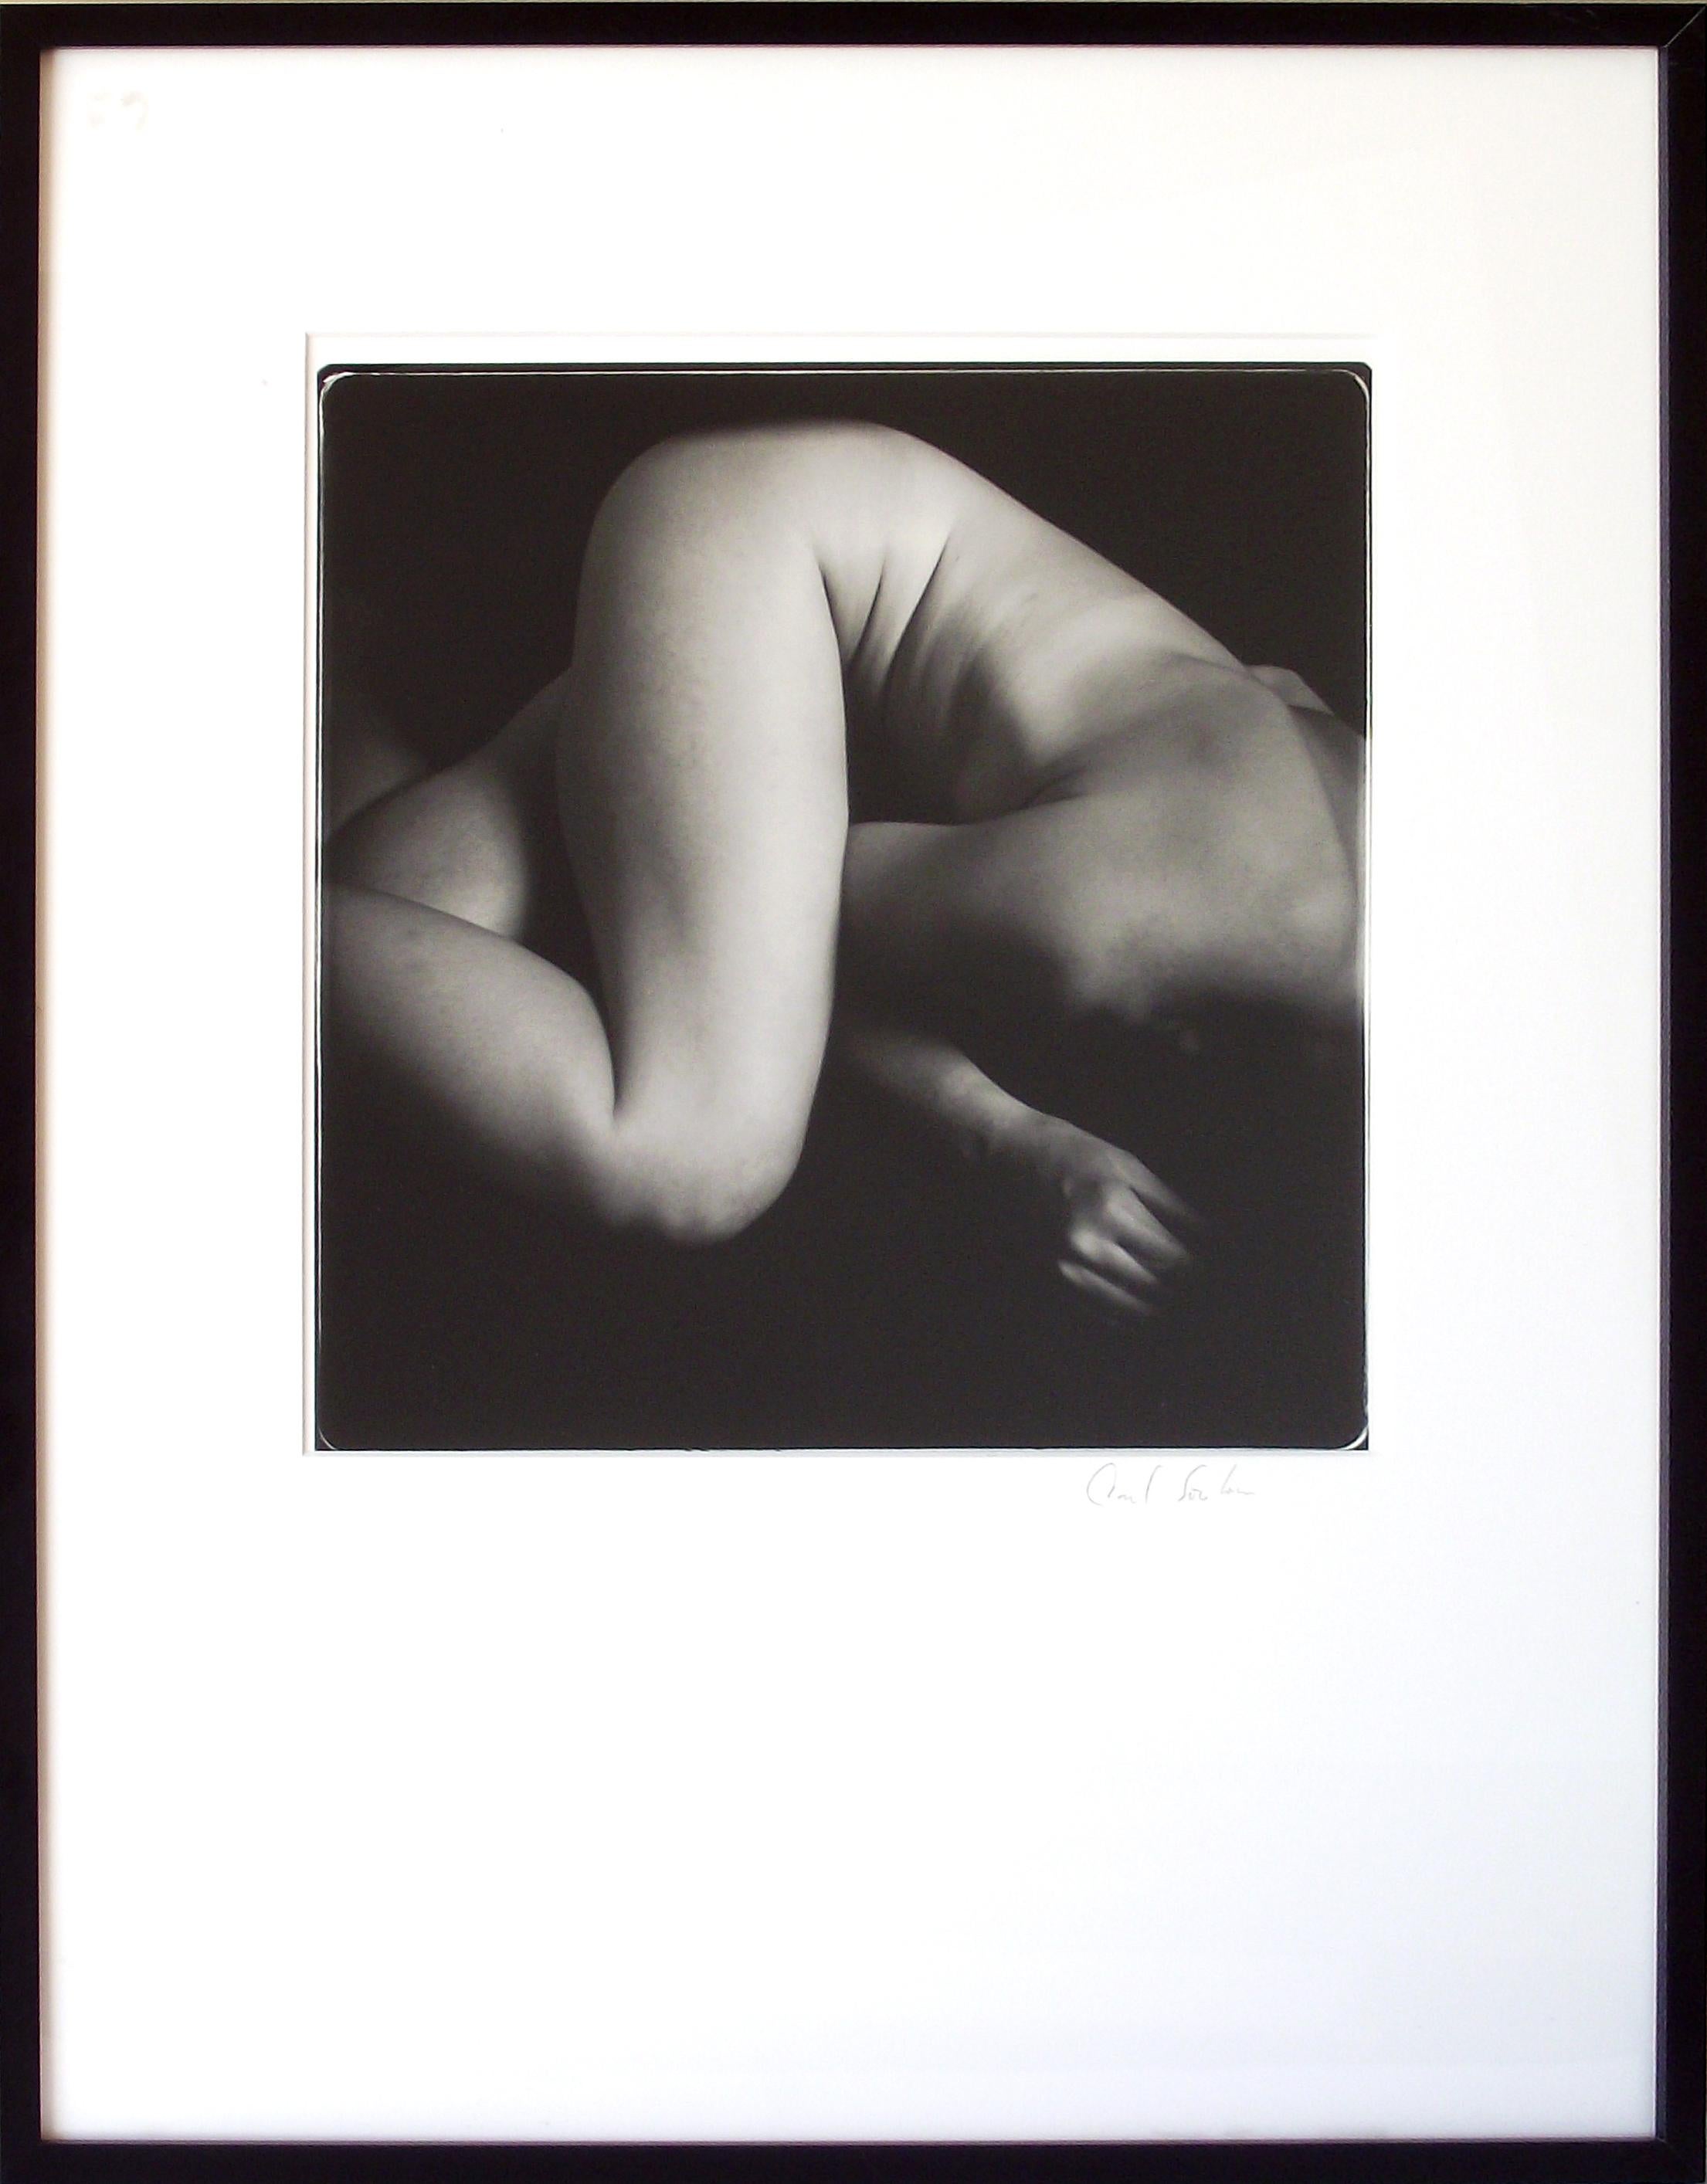 American Framed Female Nude Study Photograph, Signed